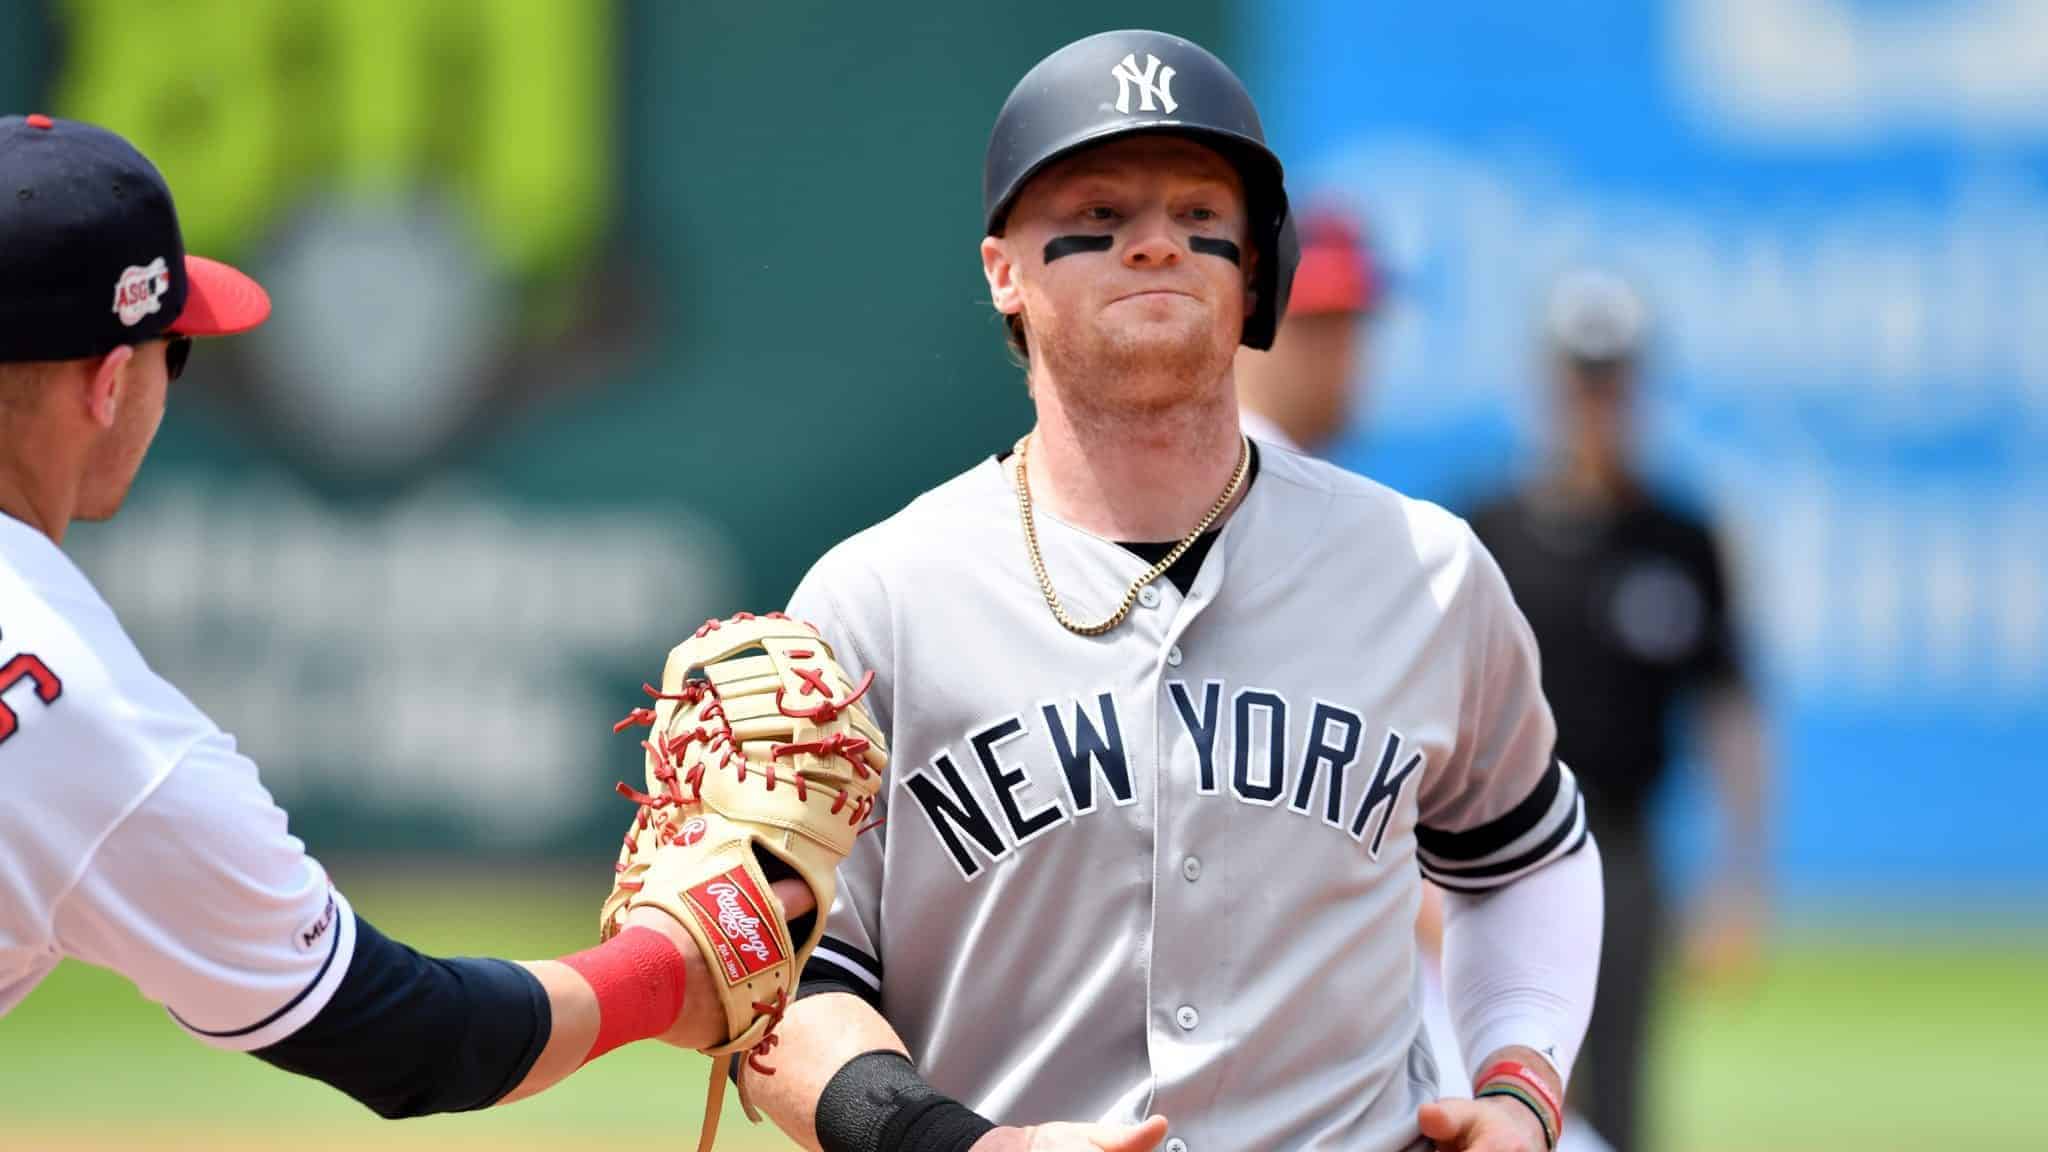 CLEVELAND, OHIO - JUNE 09: First baseman Jake Bauers #10 of the Cleveland Indians catches Clint Frazier #77 of the New York Yankees in a run down during the third inning at Progressive Field on June 09, 2019 in Cleveland, Ohio.